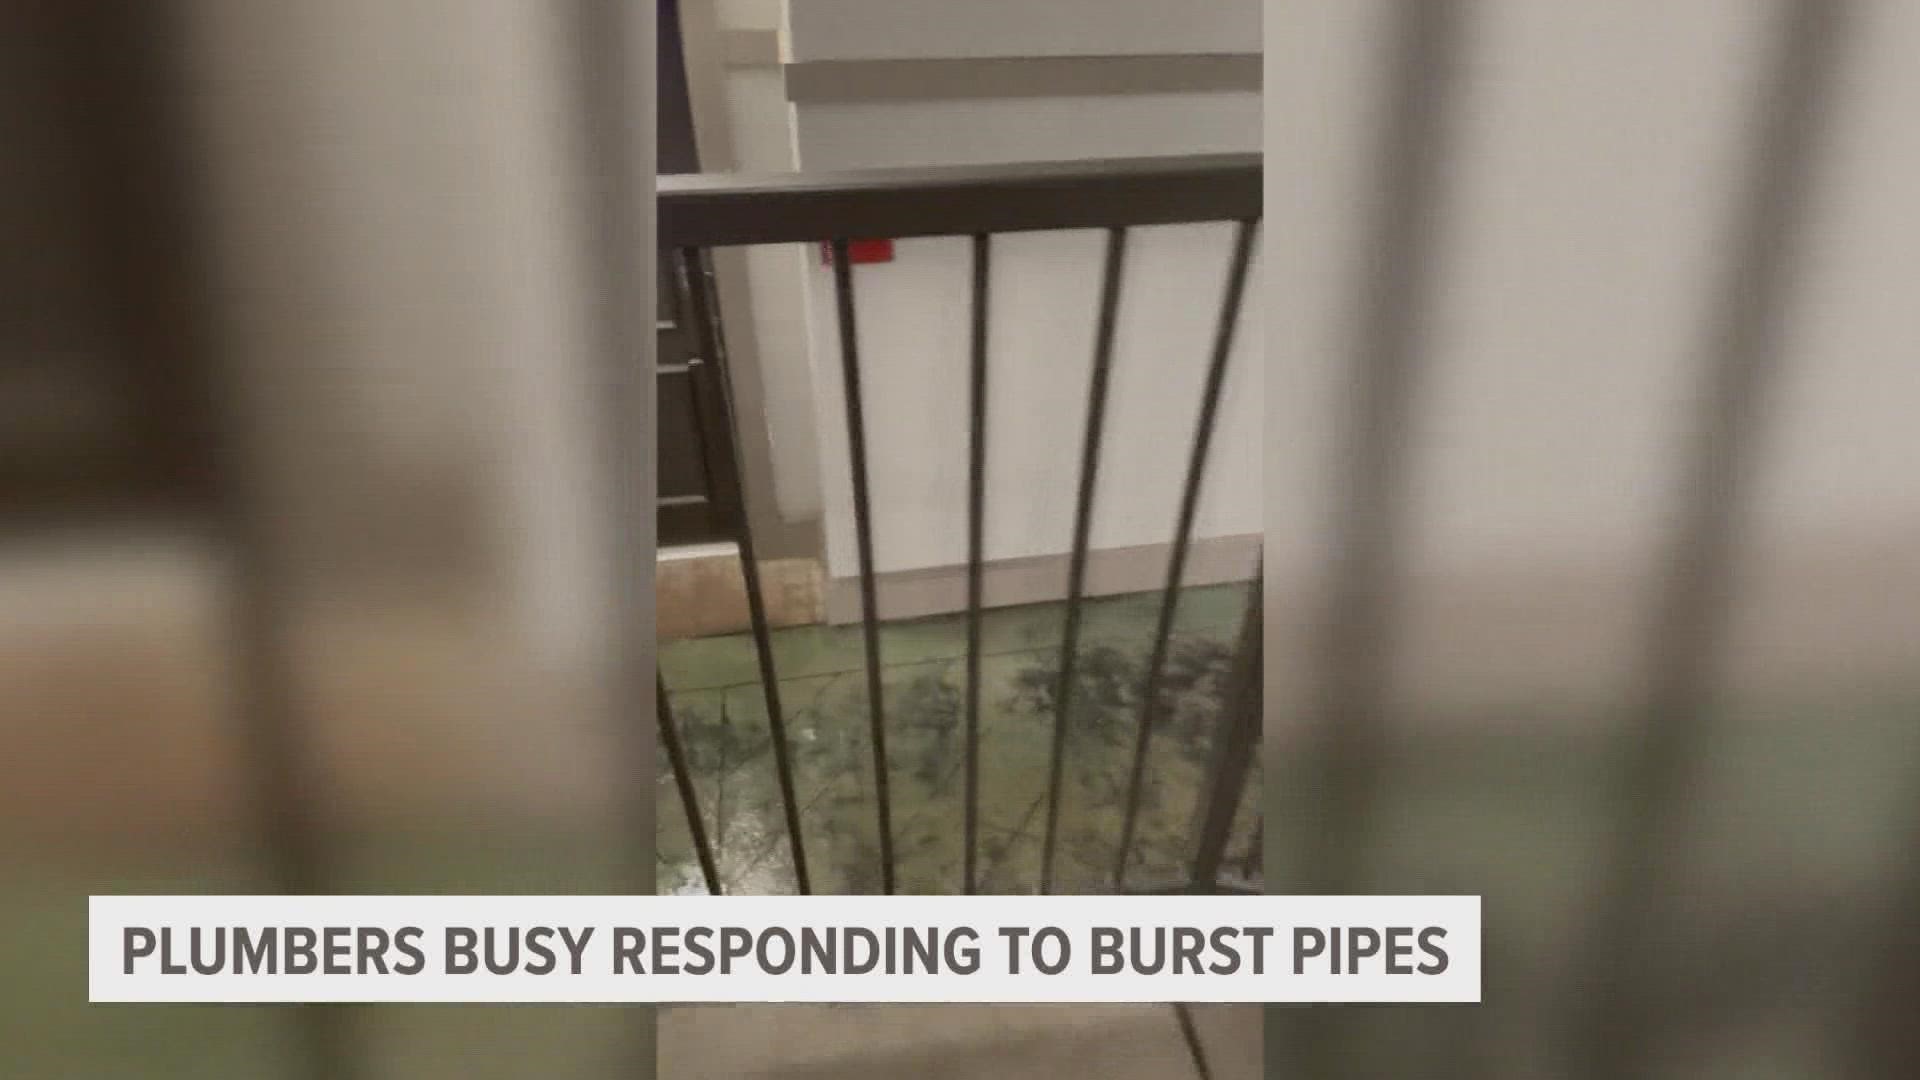 As pipes are thawing out, flooding concerns are on the rise.